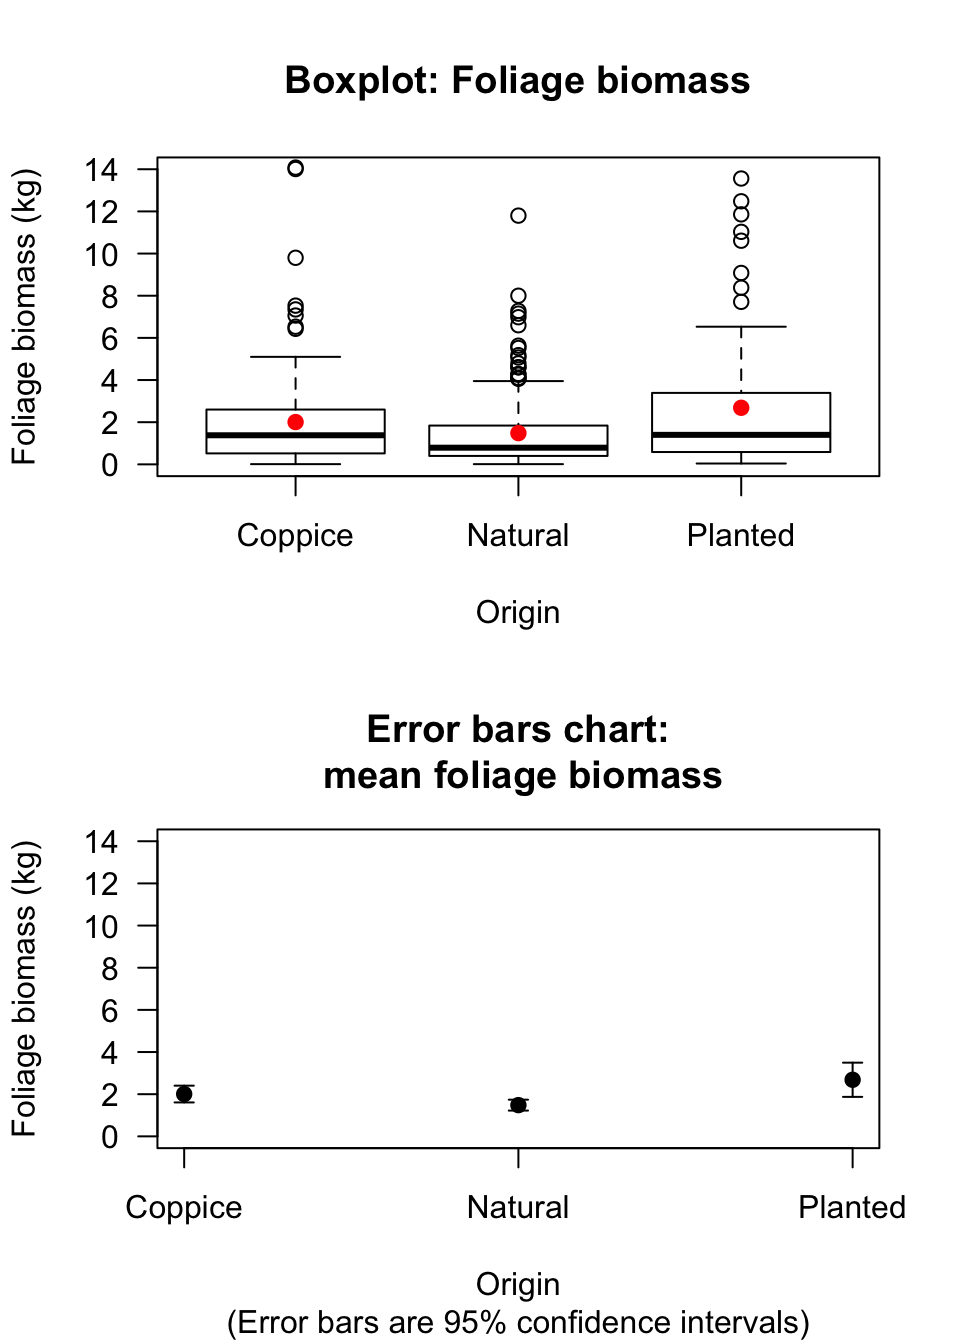 Boxplot and error bar chart comparing the mean foliage biomass for small-leaved lime trees from three sources, using the same vertical scale. The solid dots in the boxplot are shown the mean of the distributions